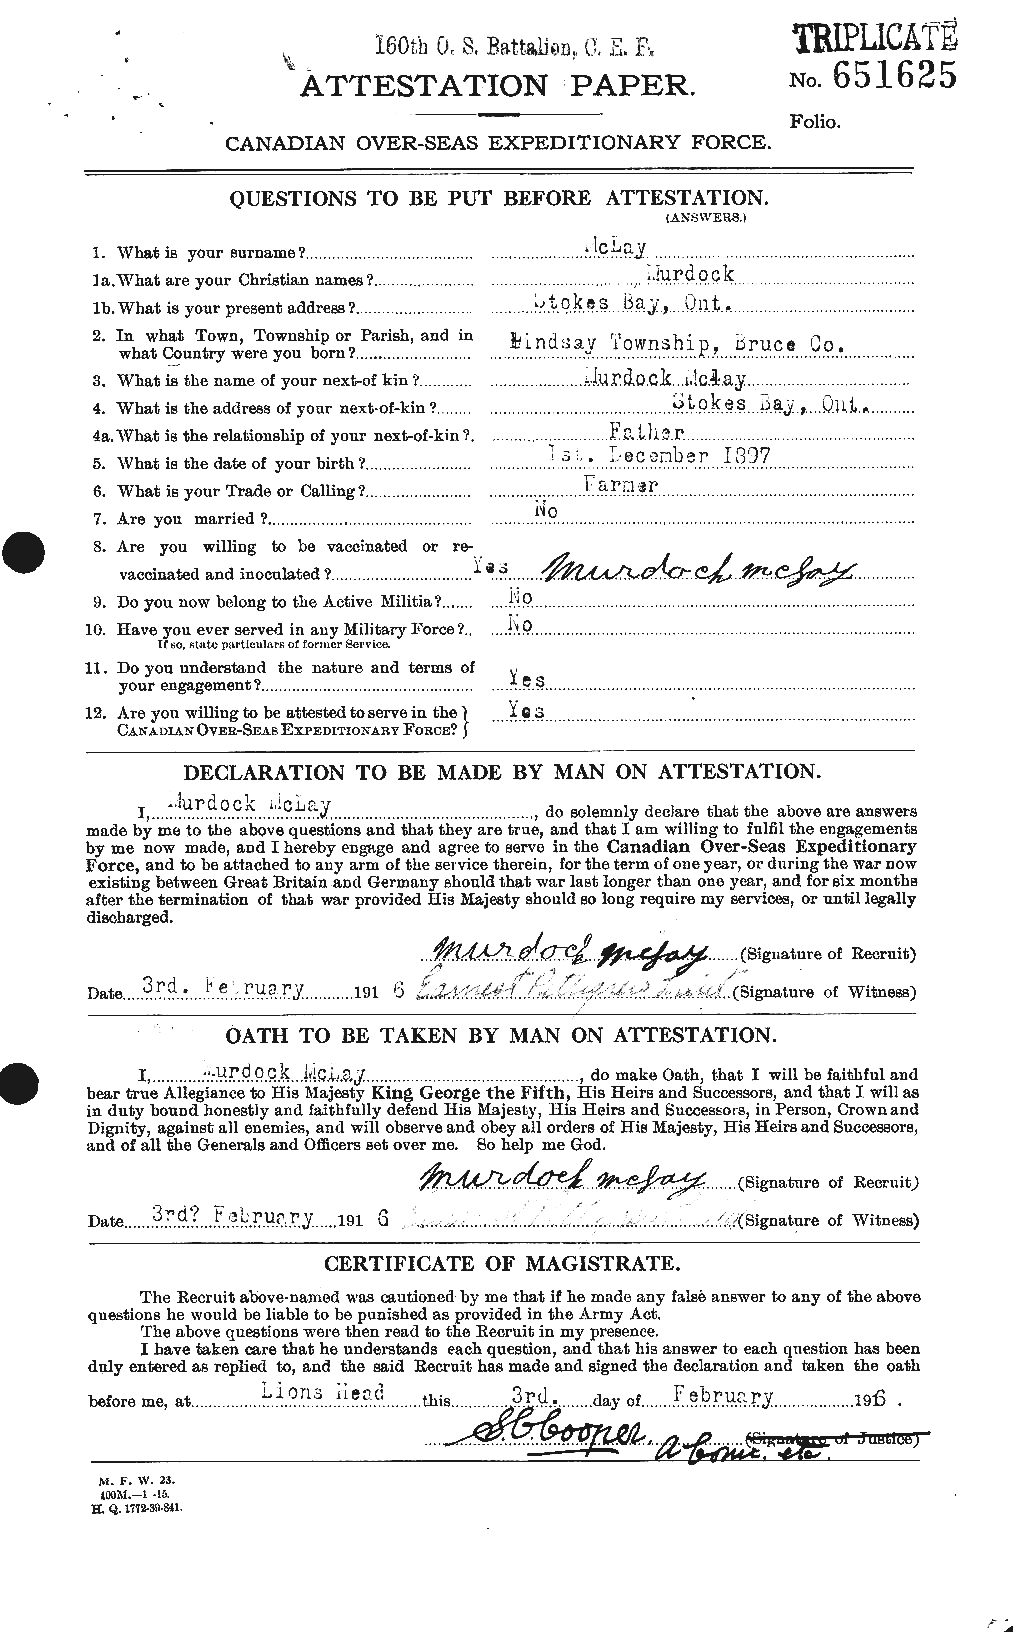 Personnel Records of the First World War - CEF 532683a